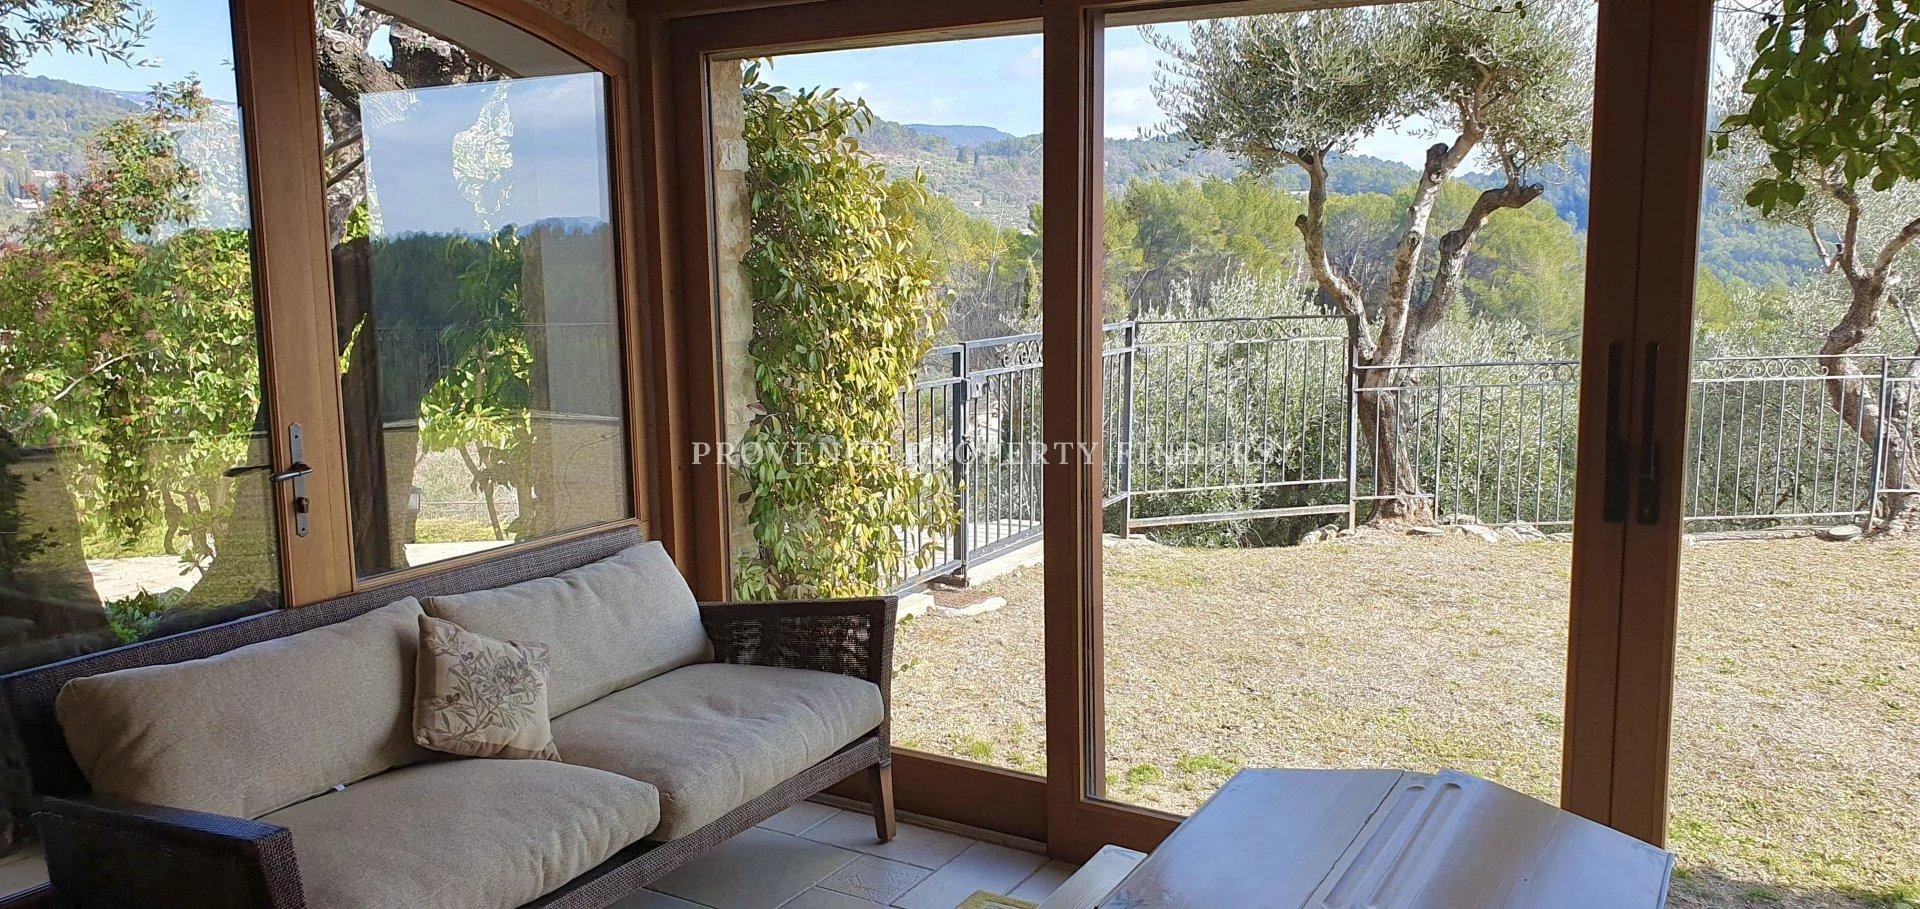 Beautiful property in the heart of the Provence, Exclusive. Property 4 bedrooms and a guest house.  Beautiful view.